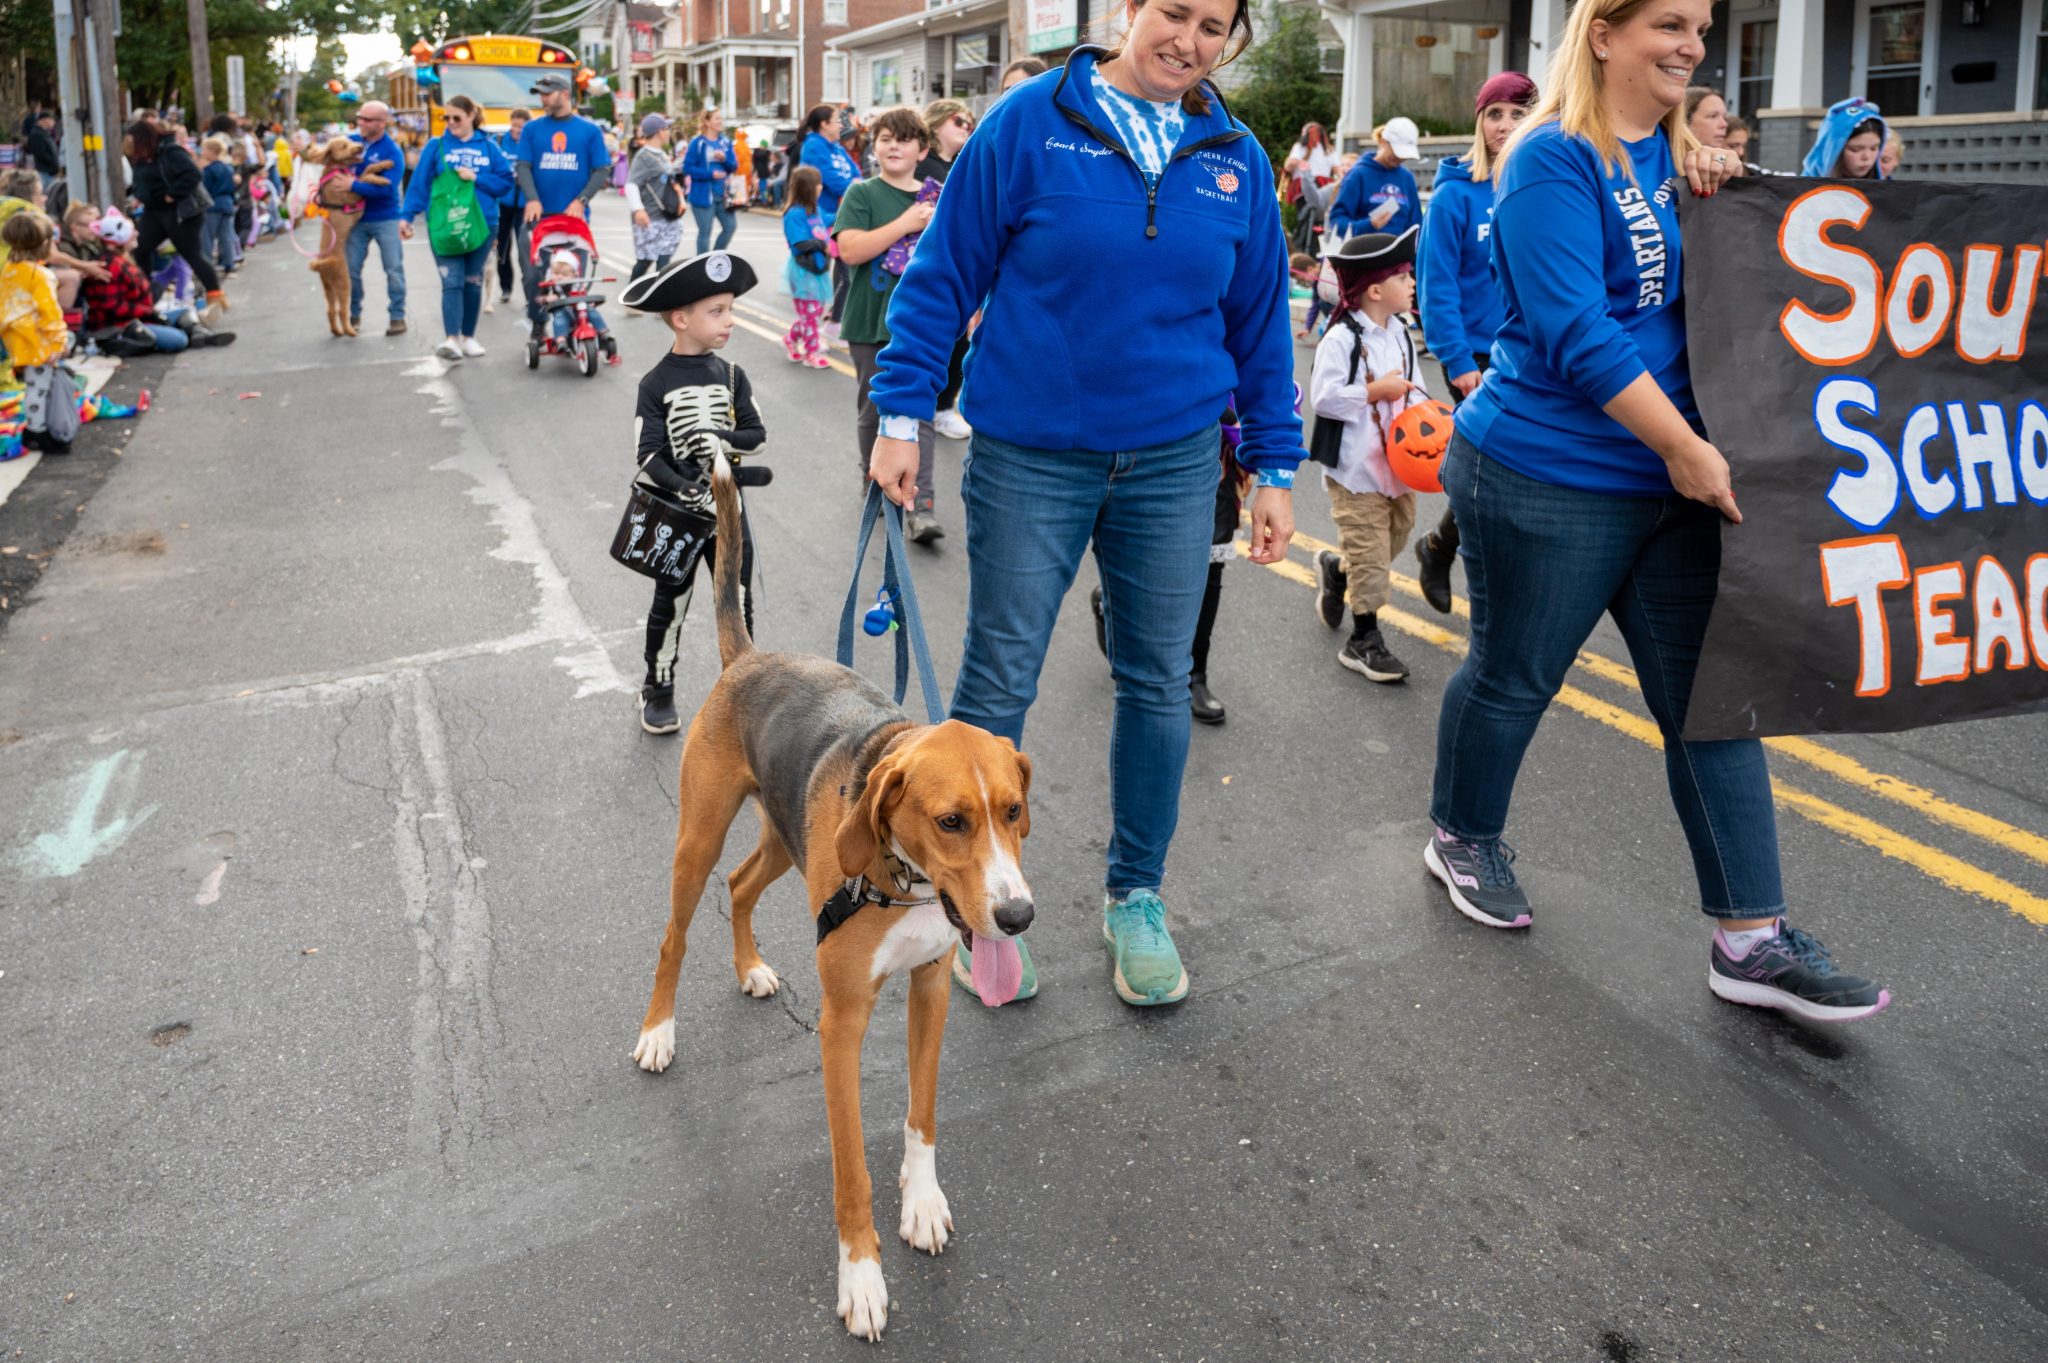 2021 Coopersburg Halloween Parade So Much Fun It's Scary (Photos